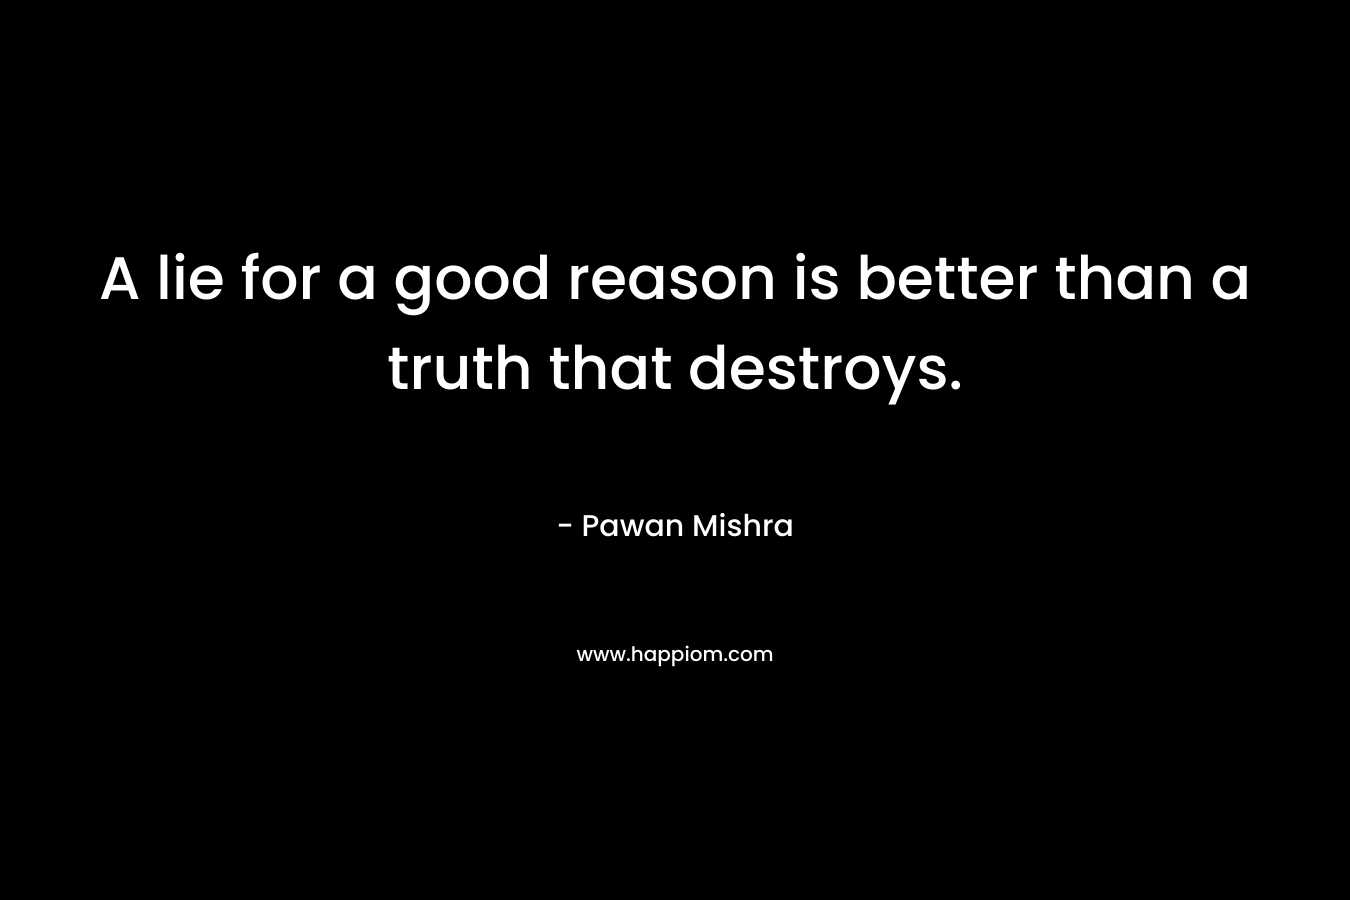 A lie for a good reason is better than a truth that destroys.